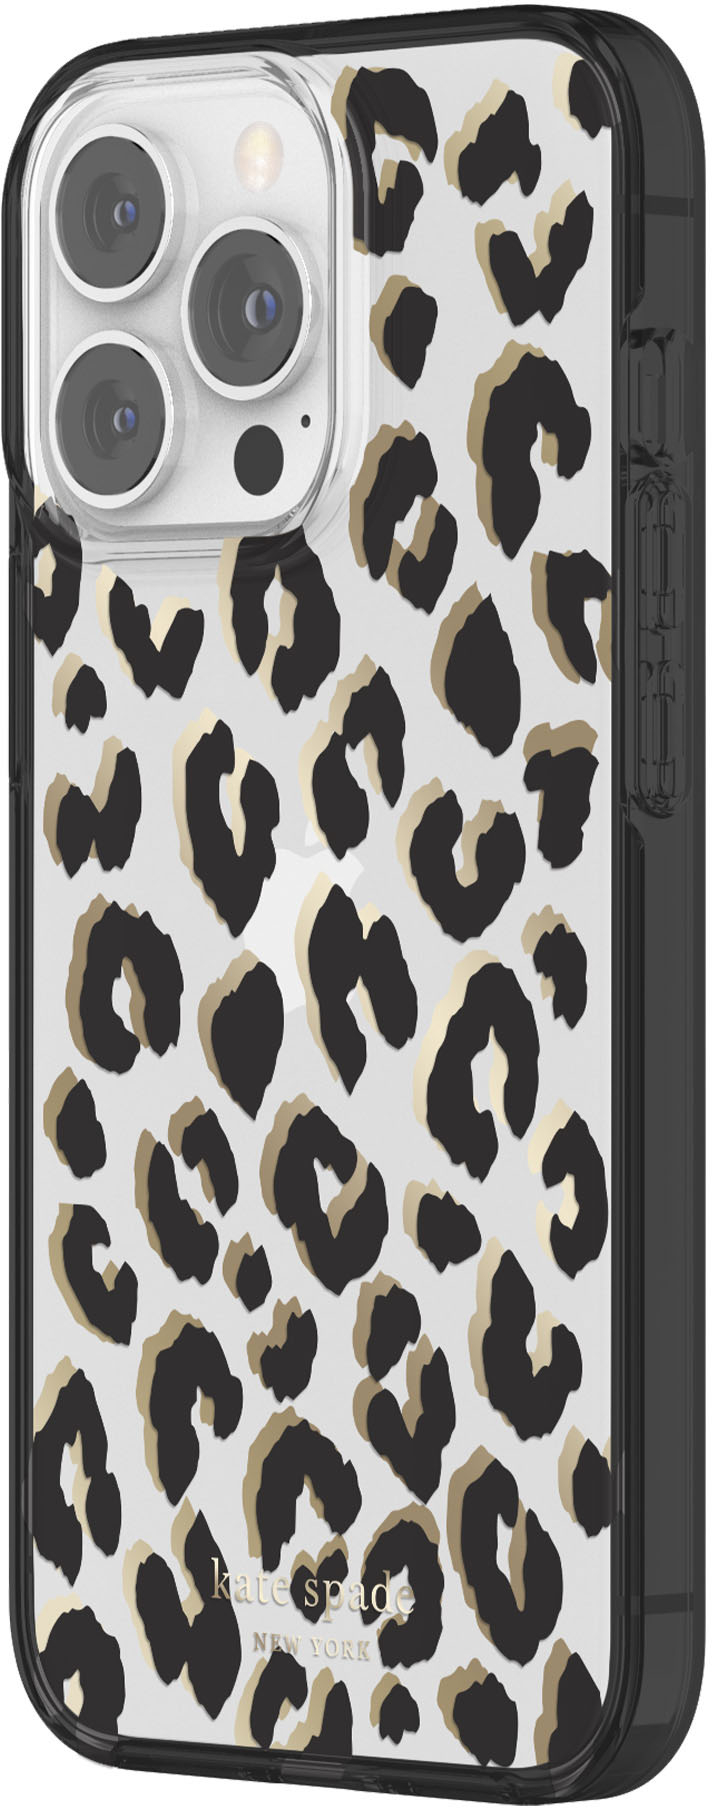 Angle View: kate spade new york - Protective Hardshell Case for iPhone 13 Pro - Leopard